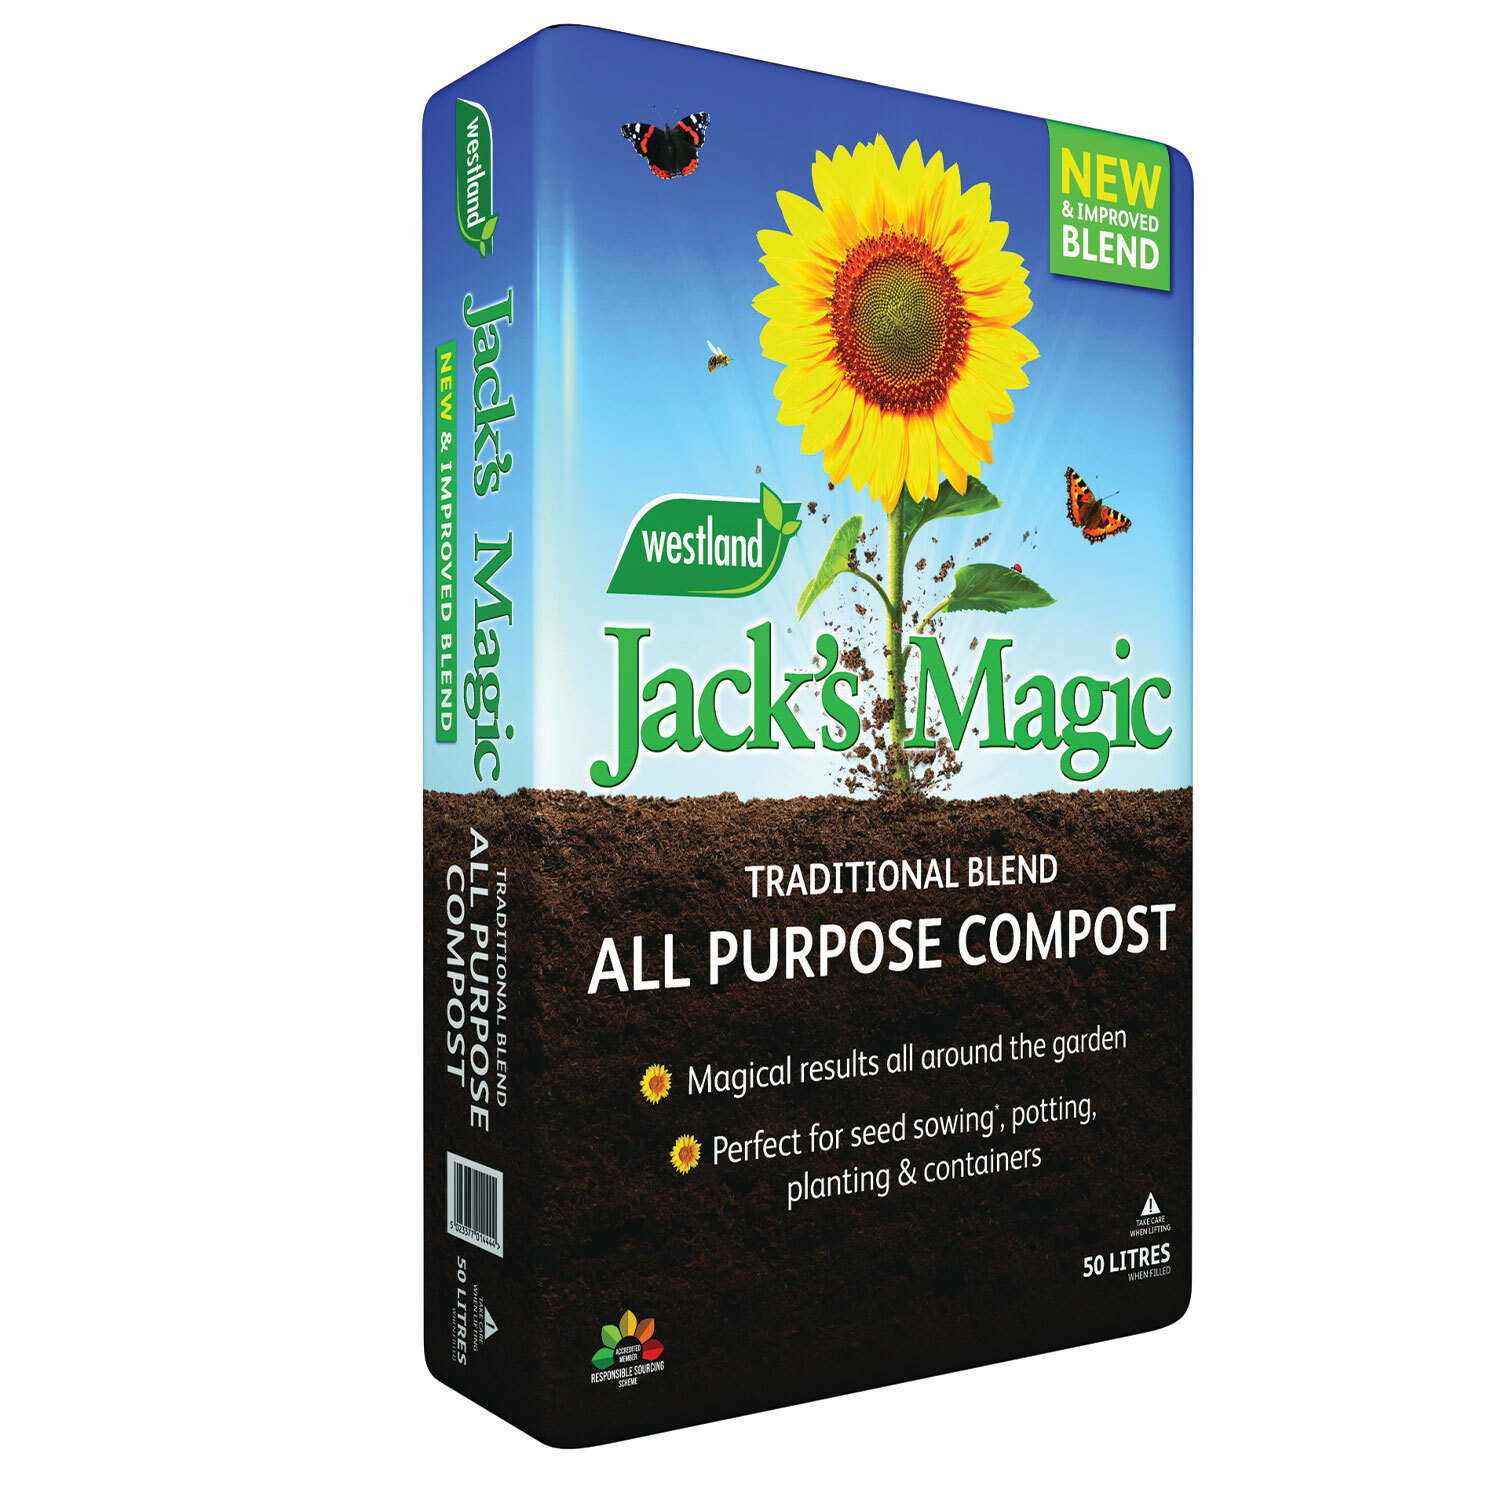 Westland Jacks Magic All Purpose Compost with Reduced Peat 50L Image